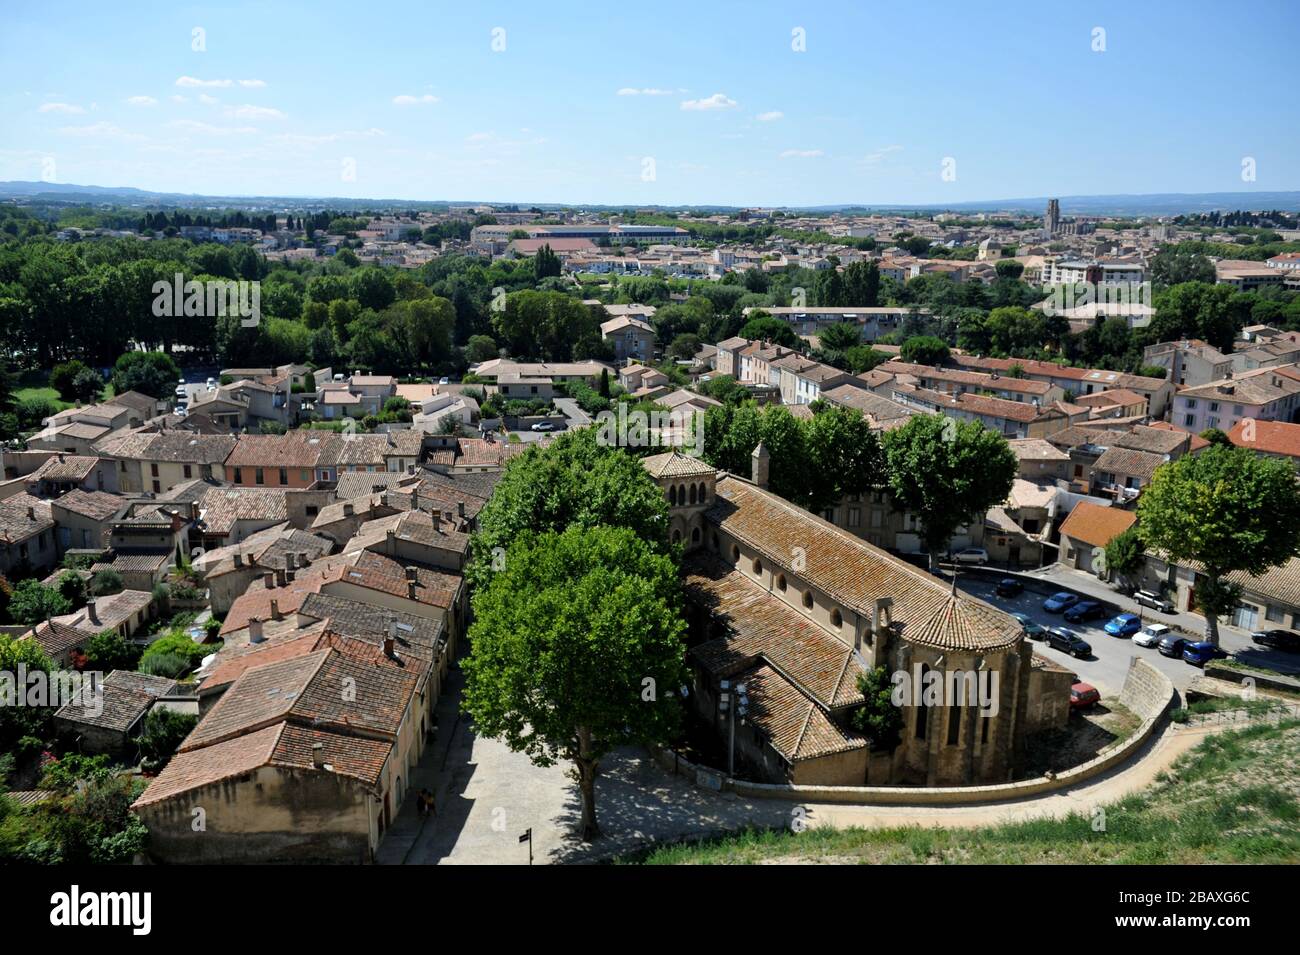 Citadel, walled city and castle in Carcassonne, Aude, France Stock Photo